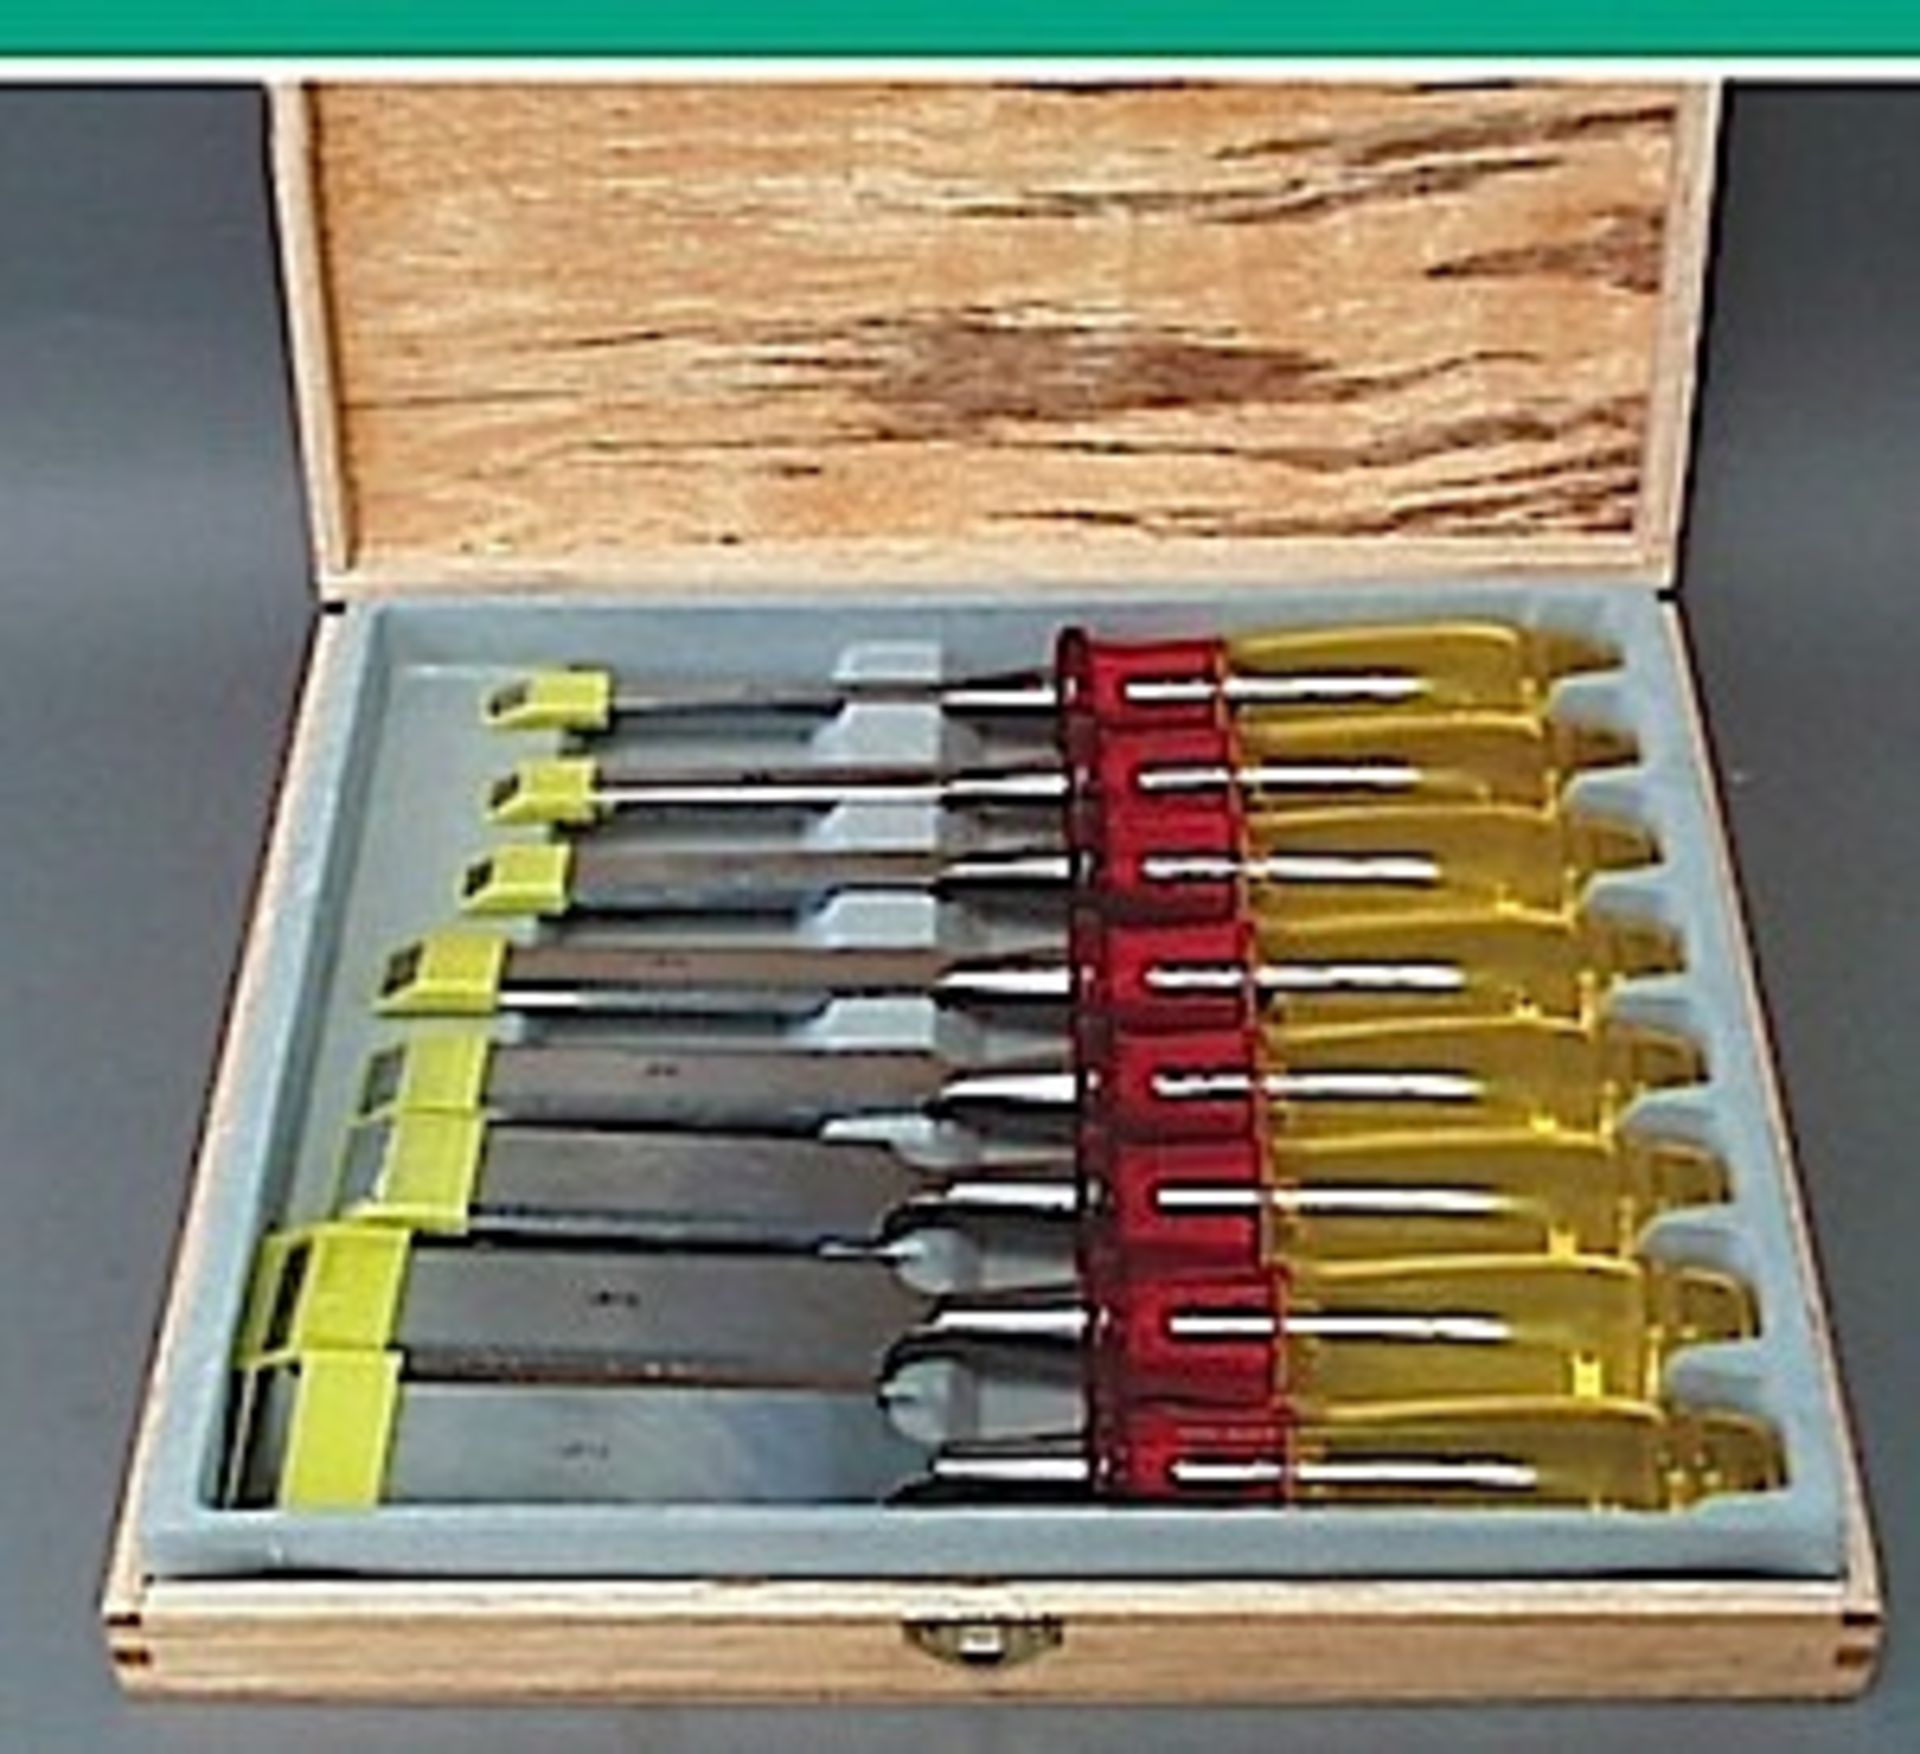 V *TRADE QTY* Brand New Eight Piece Professional Chisel Set With Wooden Storage Case X 10 YOUR BID - Image 2 of 2